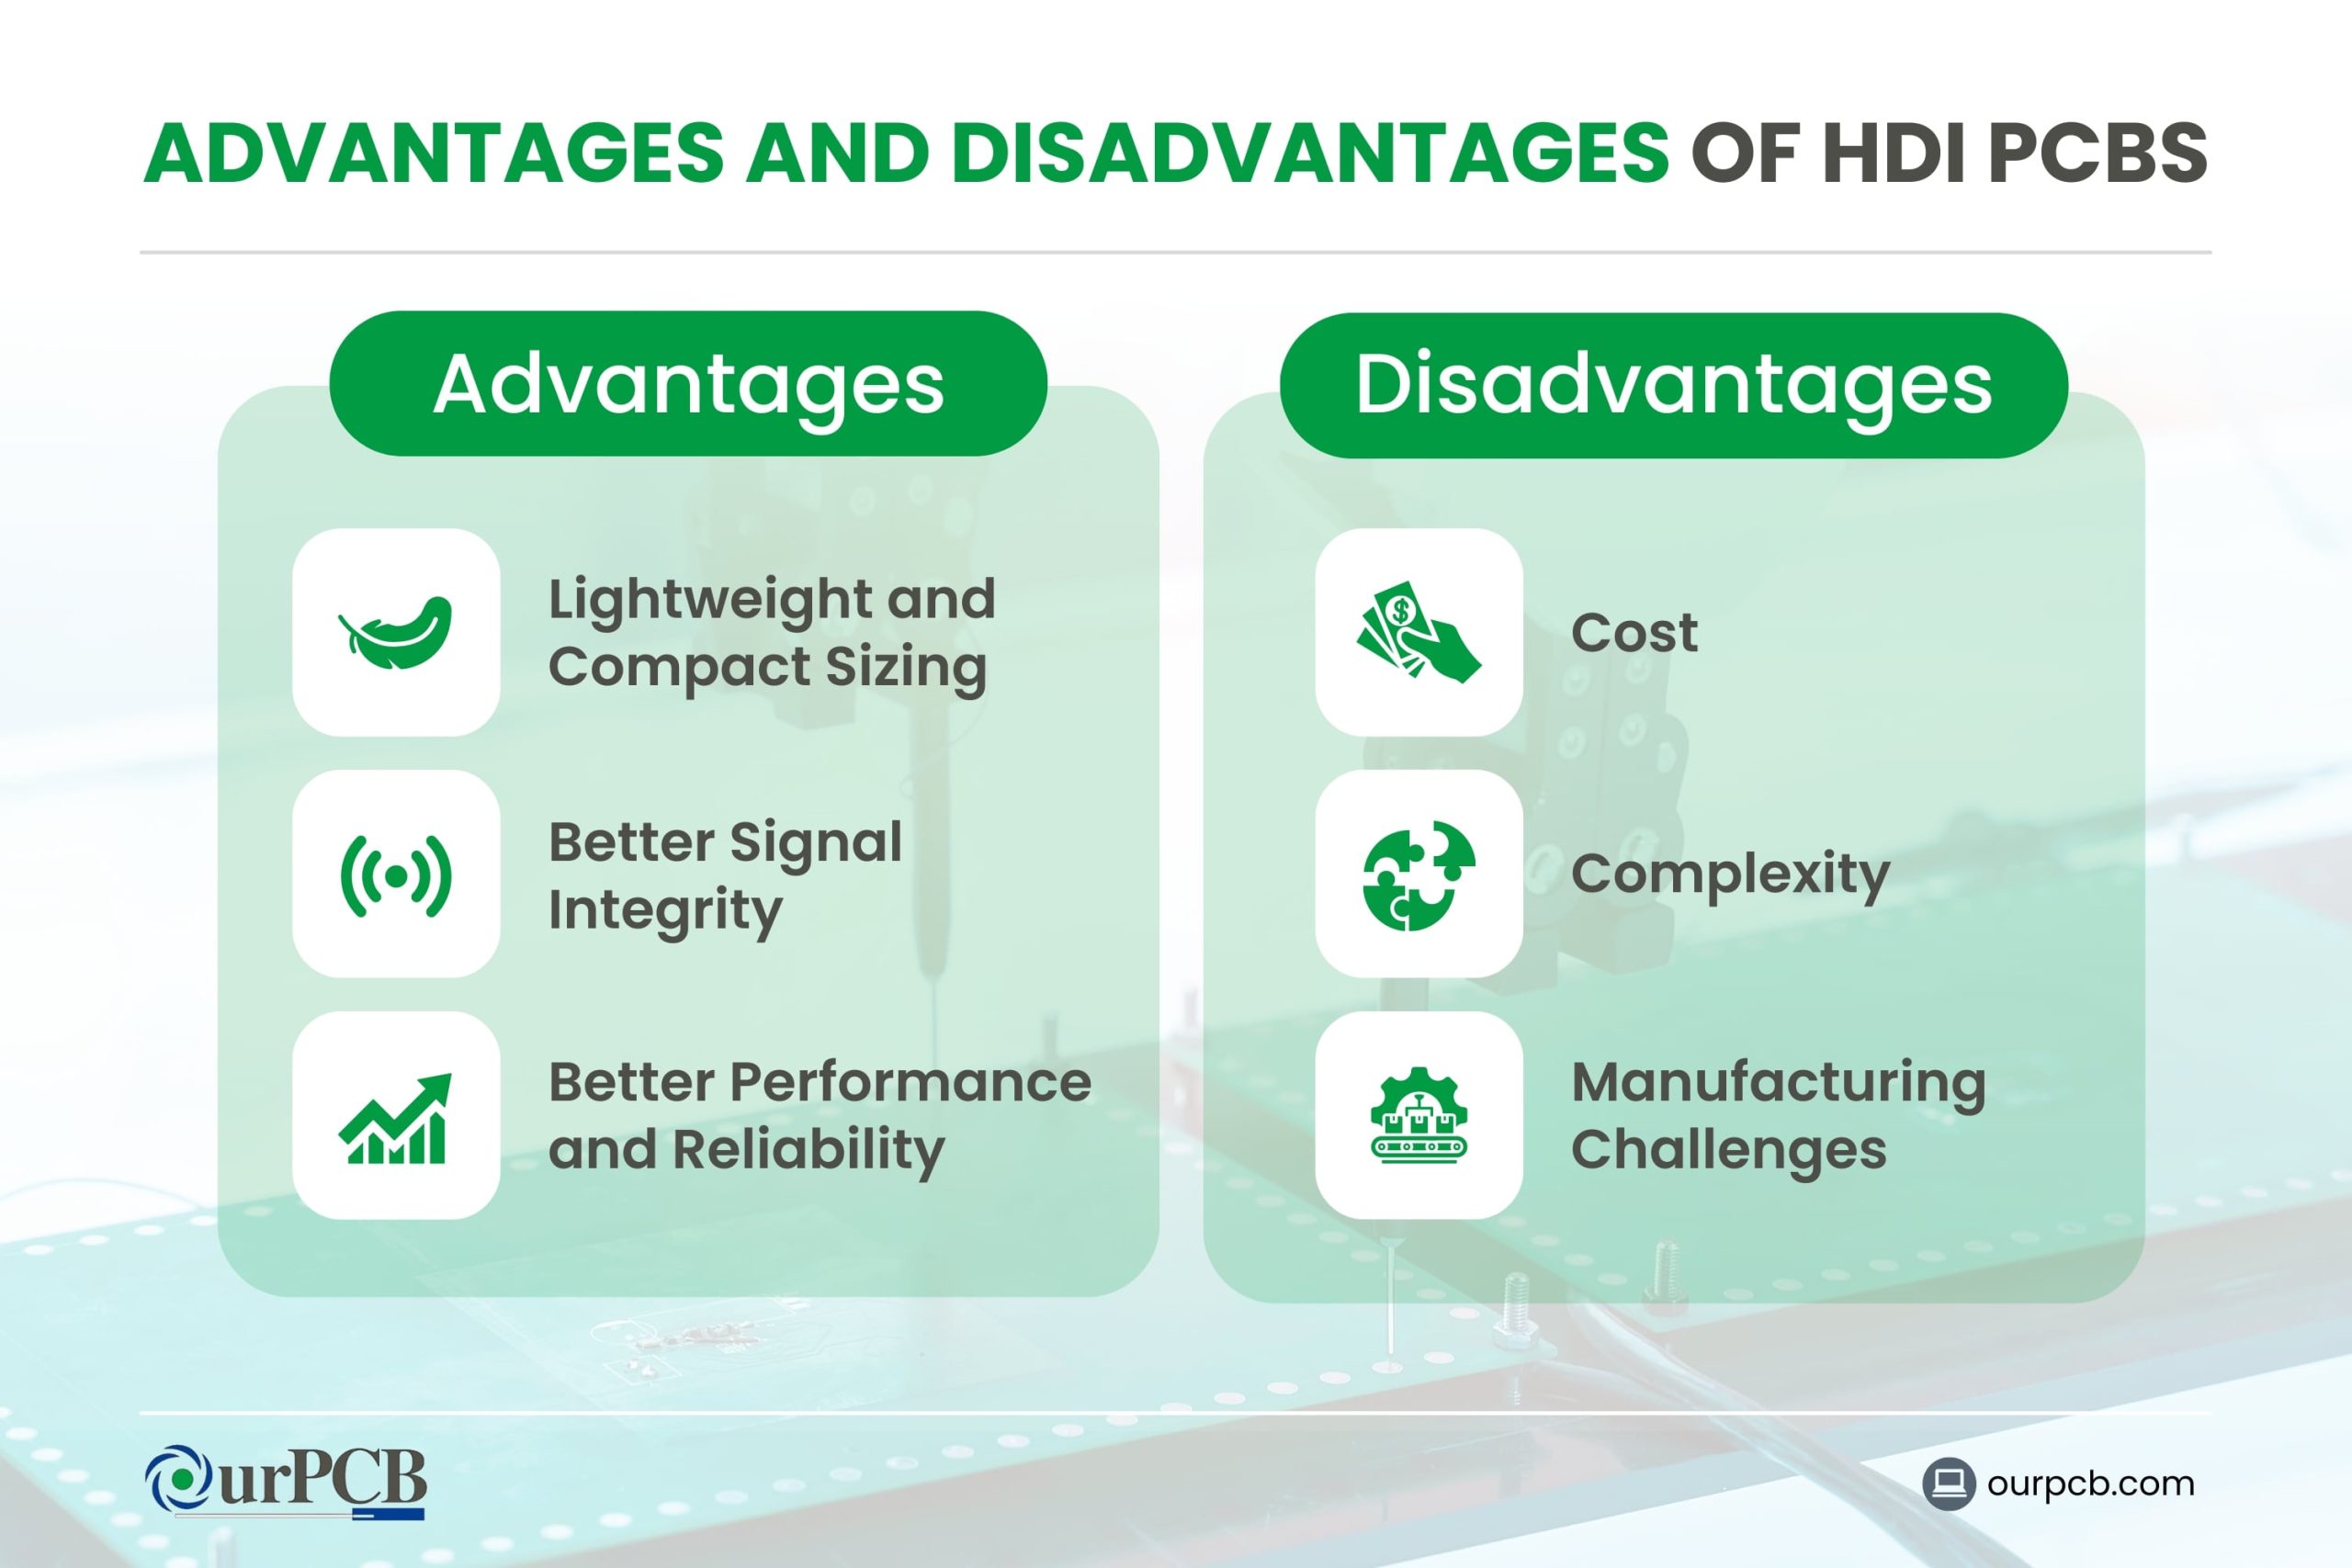 Advantages and Disadvantages of HDI PCBs